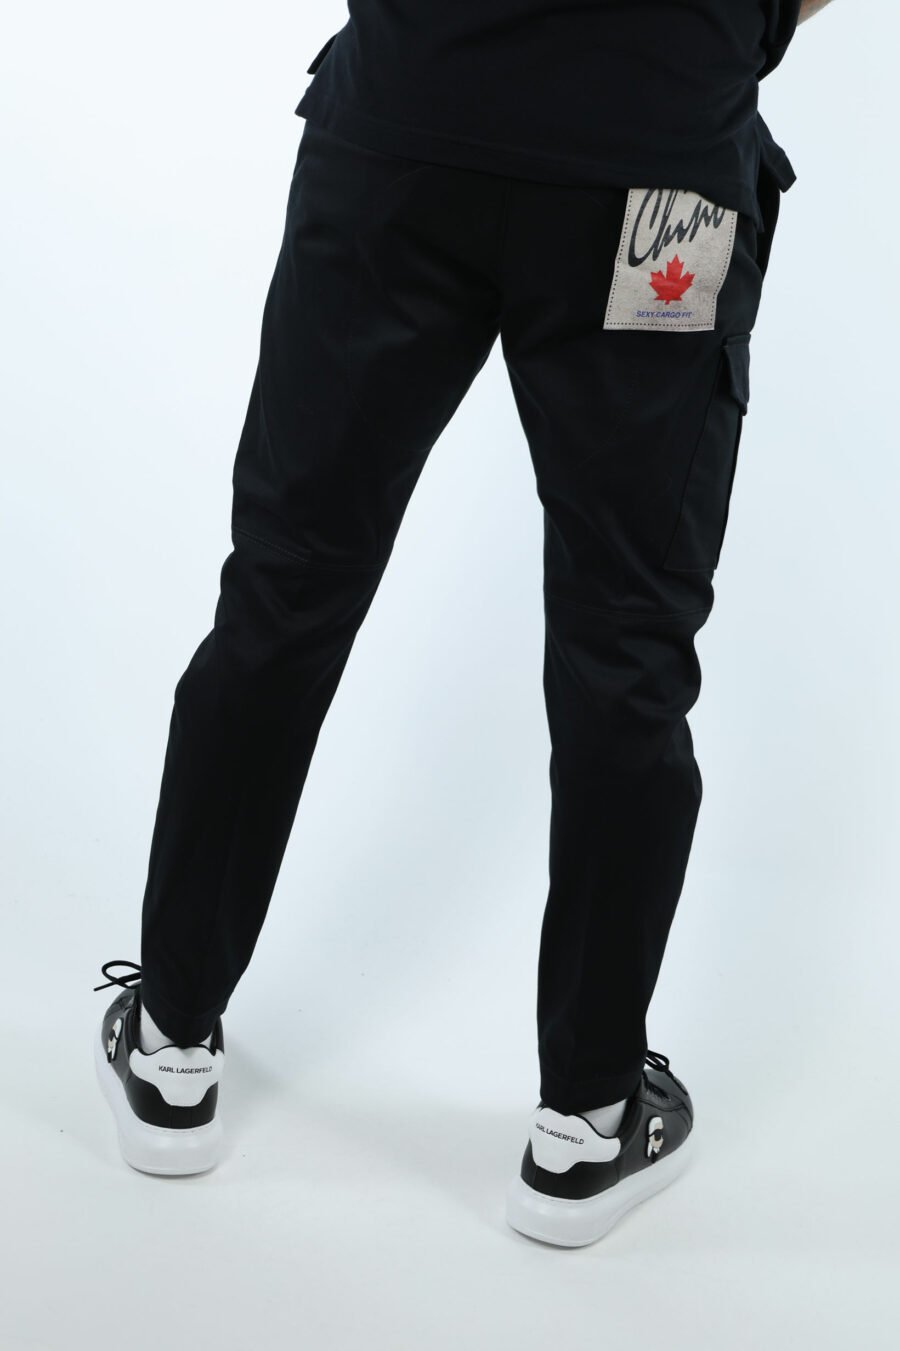 Black cargo style "sexy cargo" trousers - 8054148388997 2